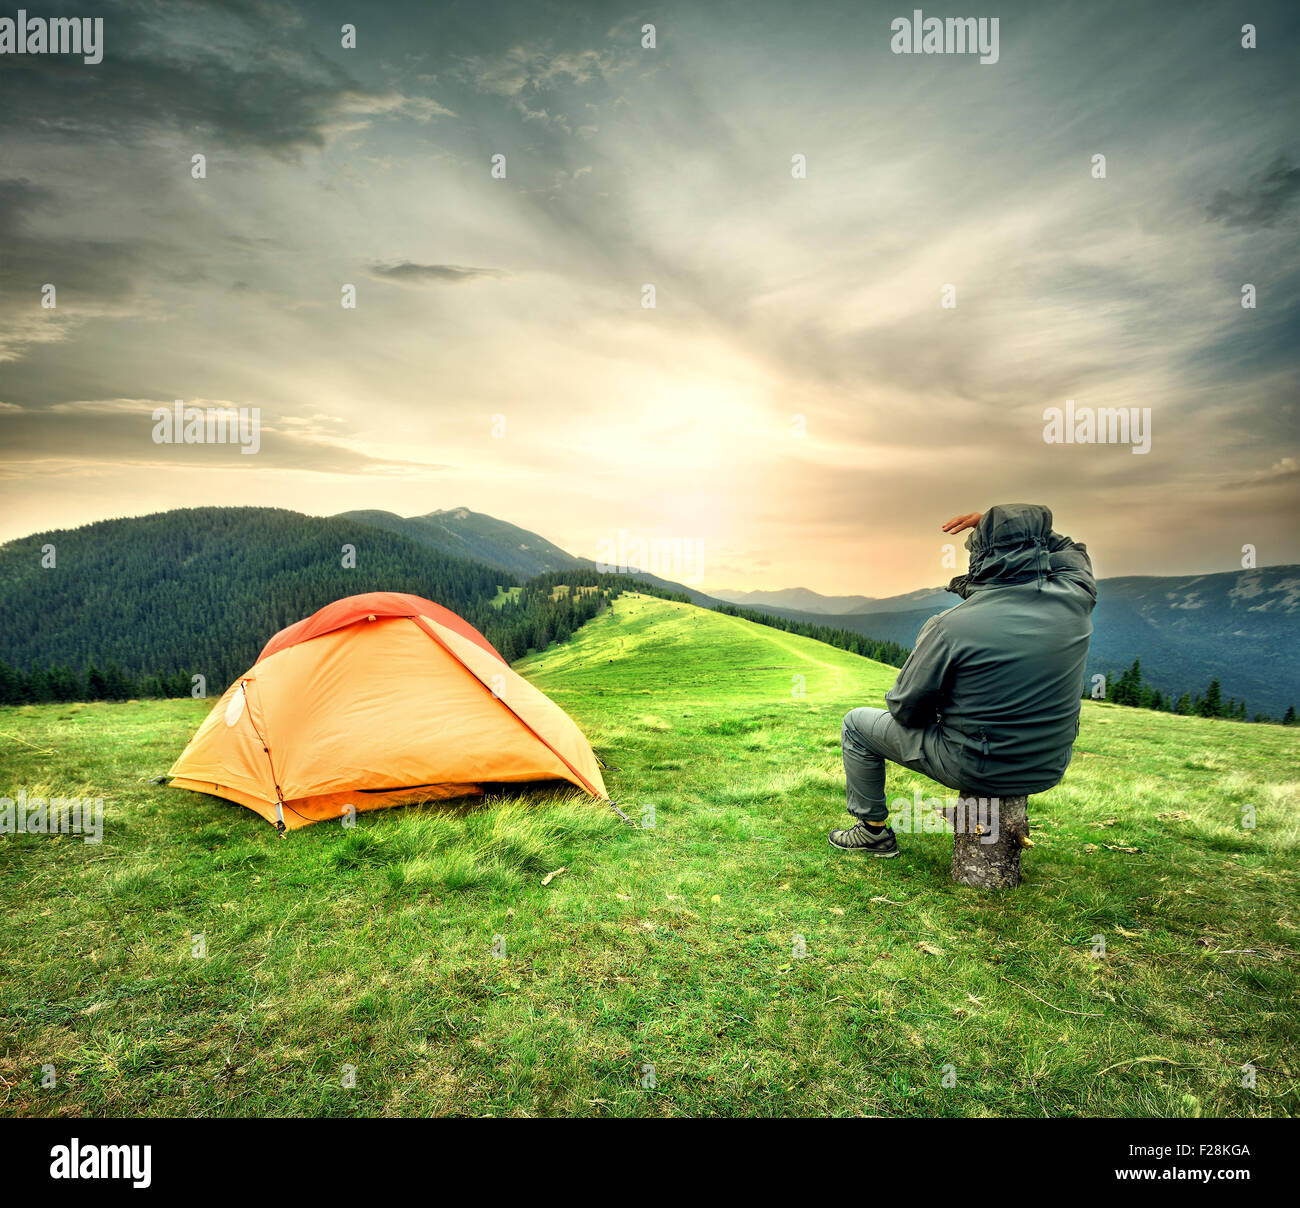 Man sitting near tent looking at the setting sun over mountains Stock Photo